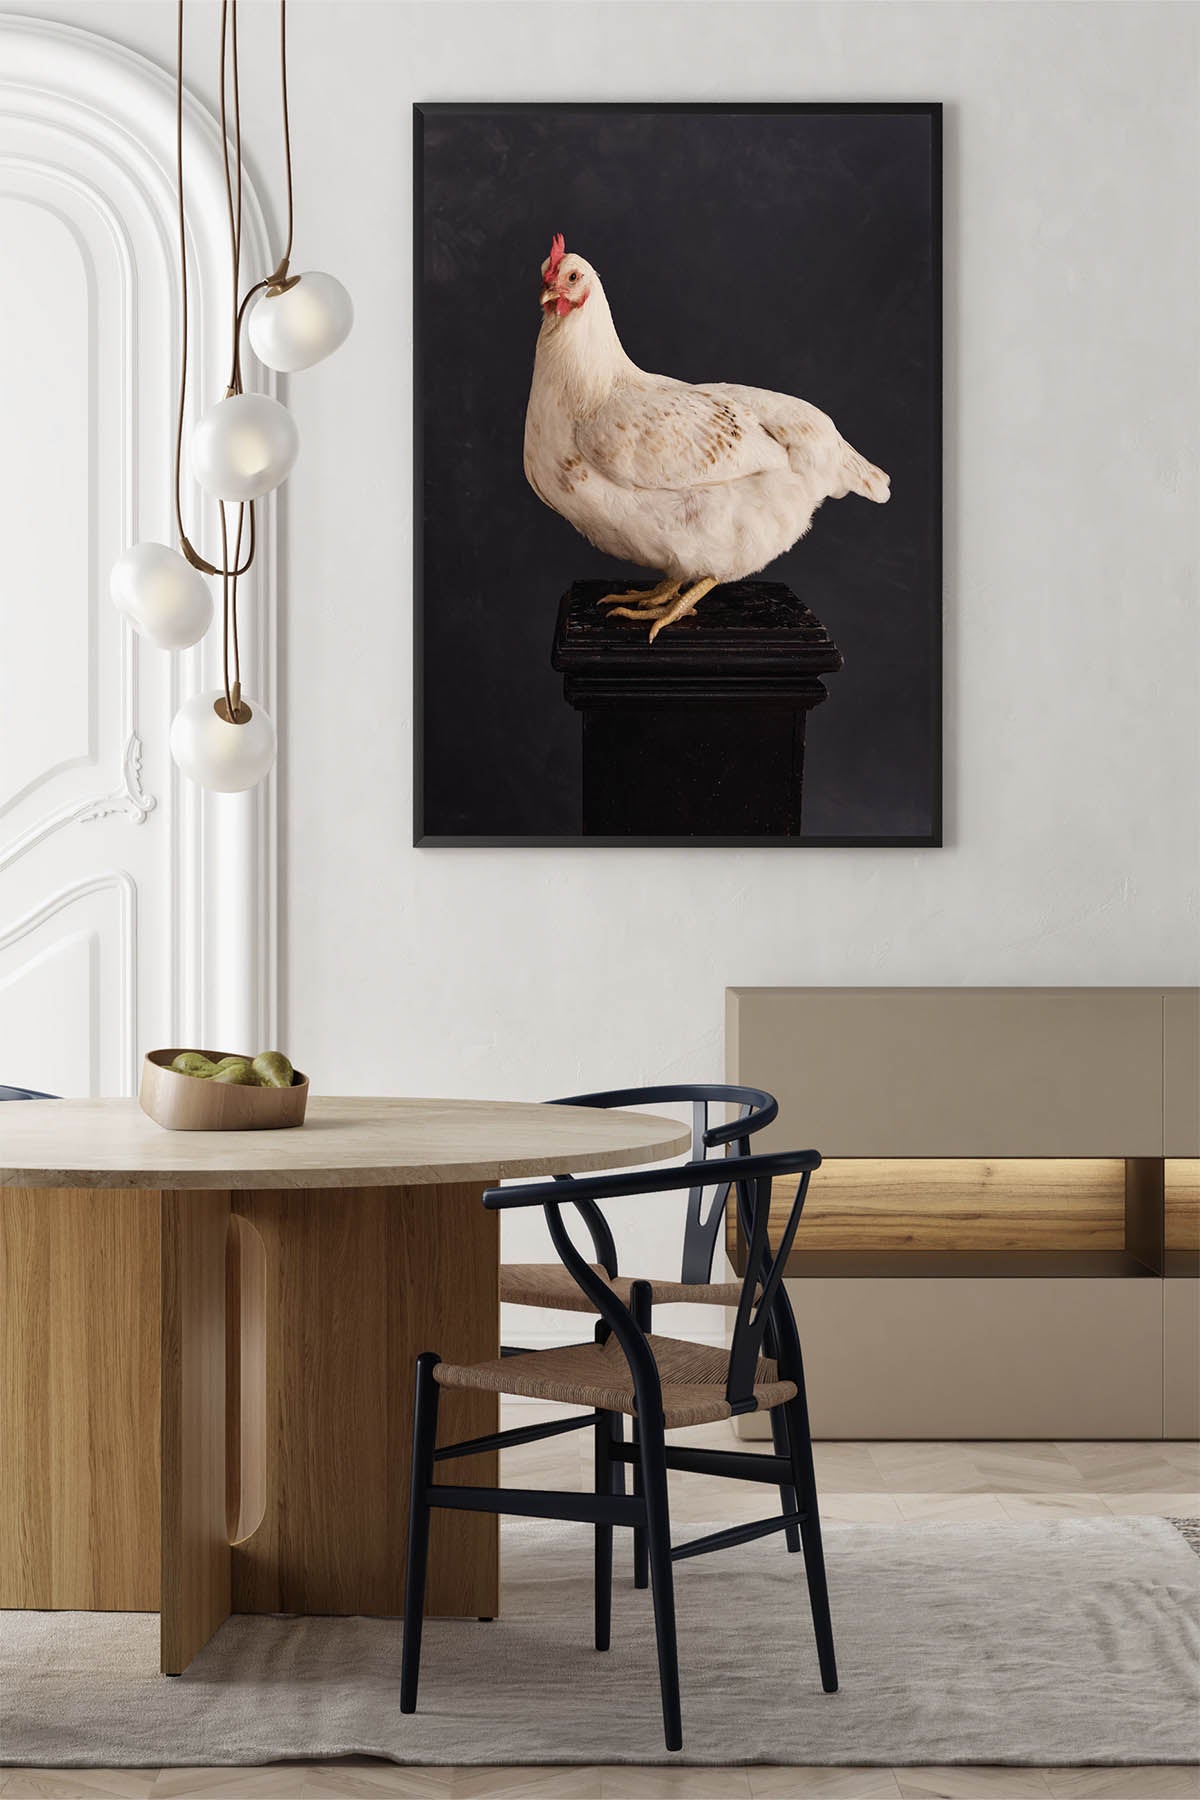 Fine Art Print Of A White Chicken Standing On A Black Plinth In A Danish Style Dining Room Near Black Wishbone Chairs.